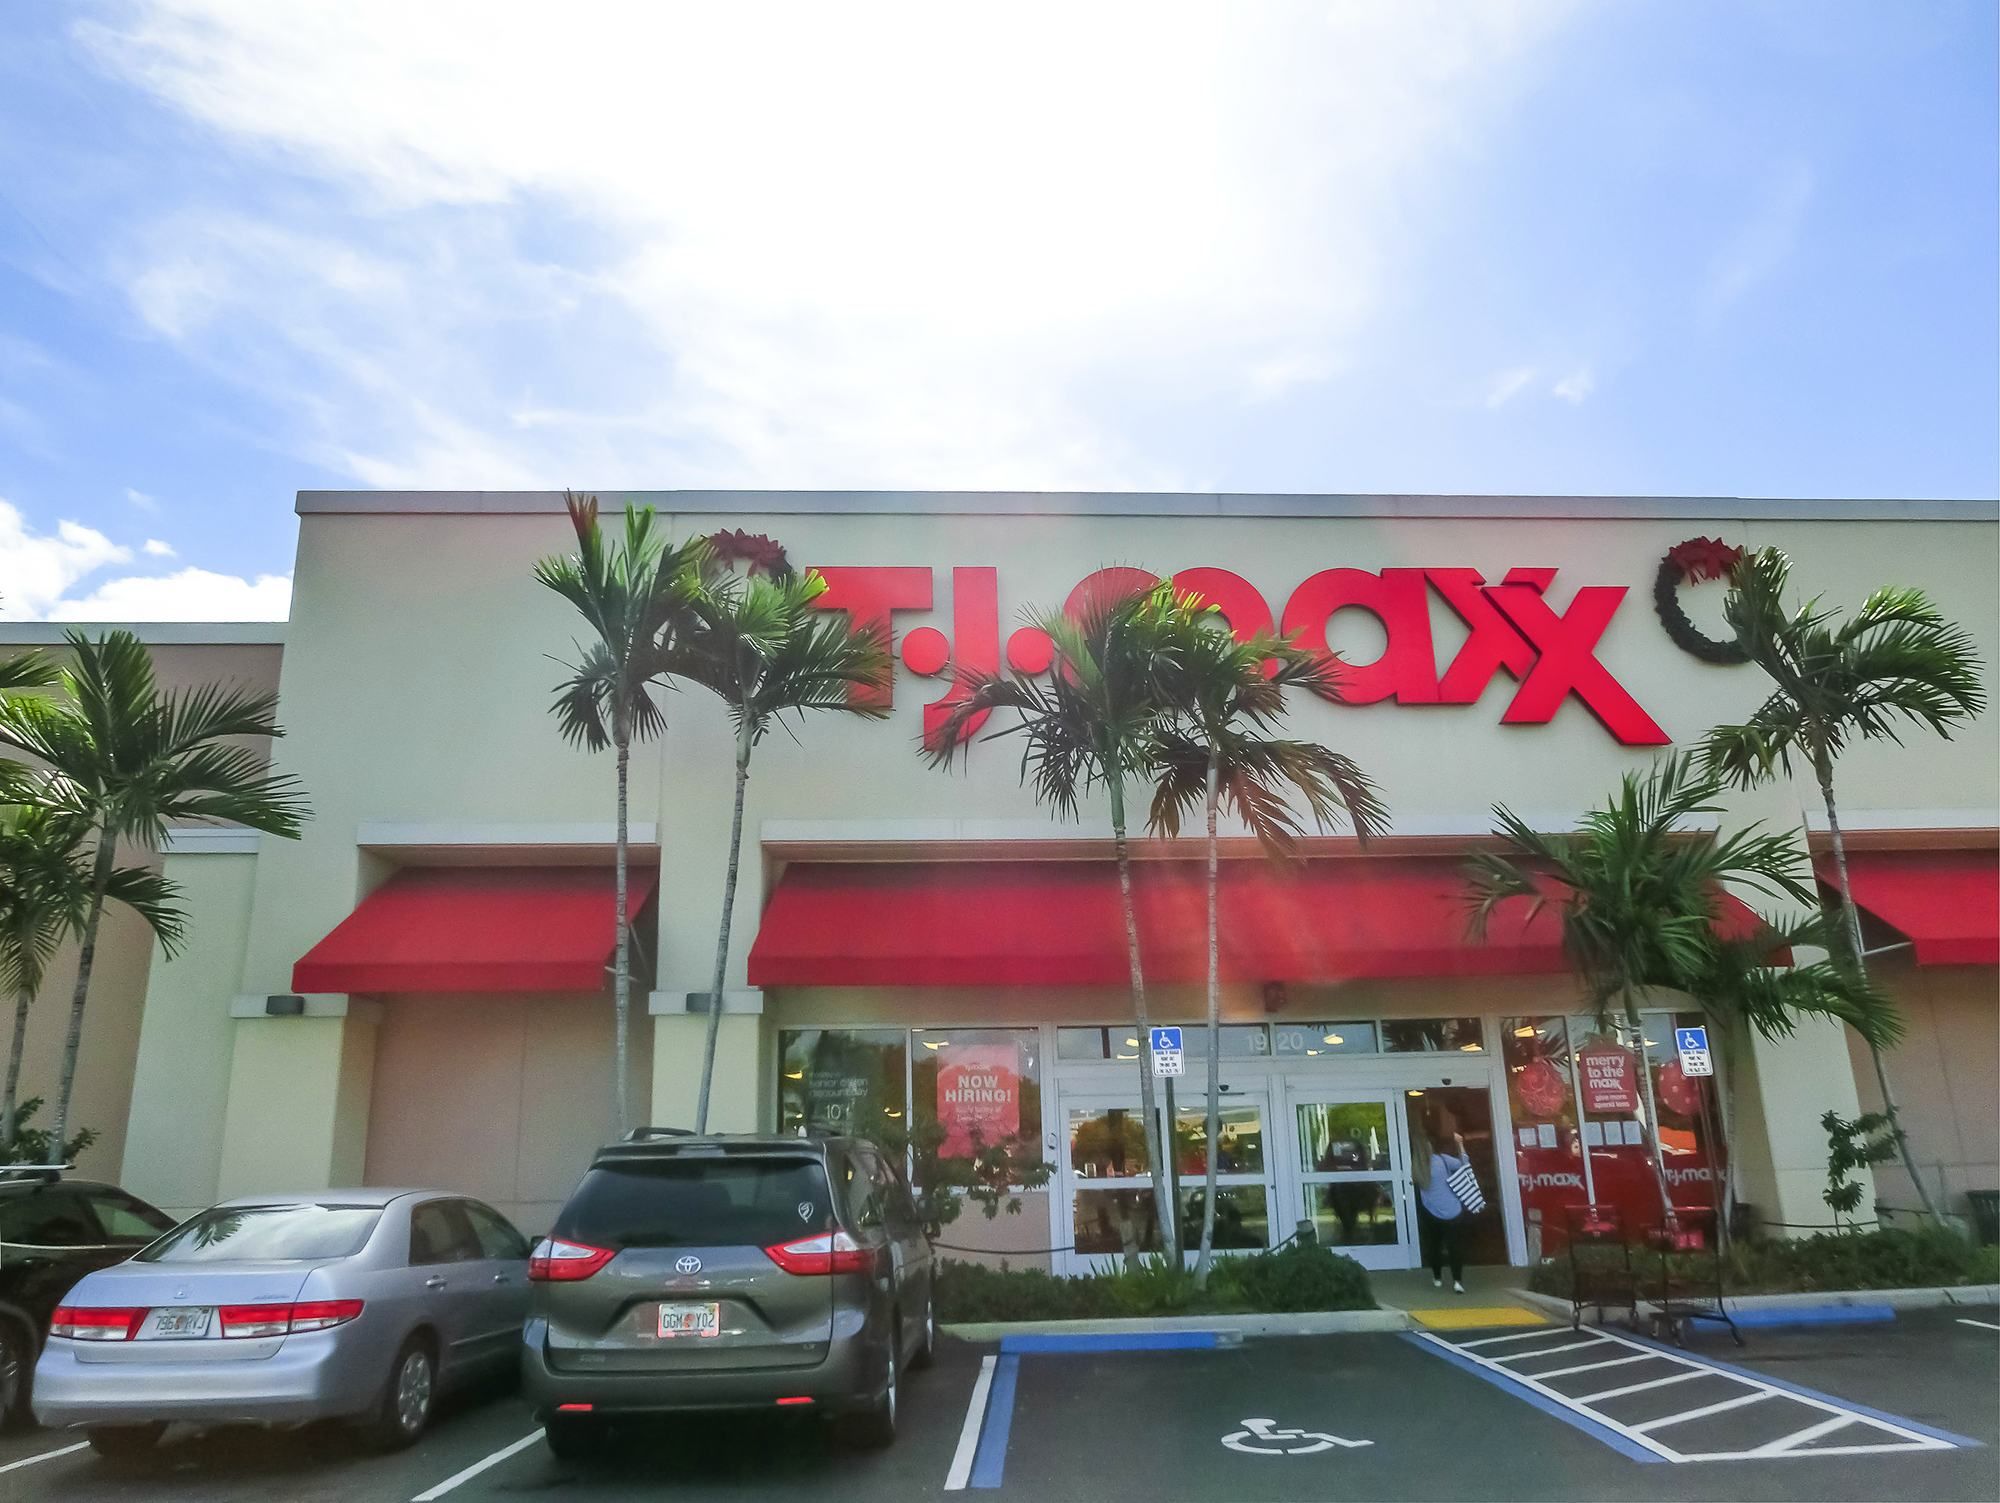 TJ Maxx Agrees to $4.8 Overtime Class Action Settlement - Top